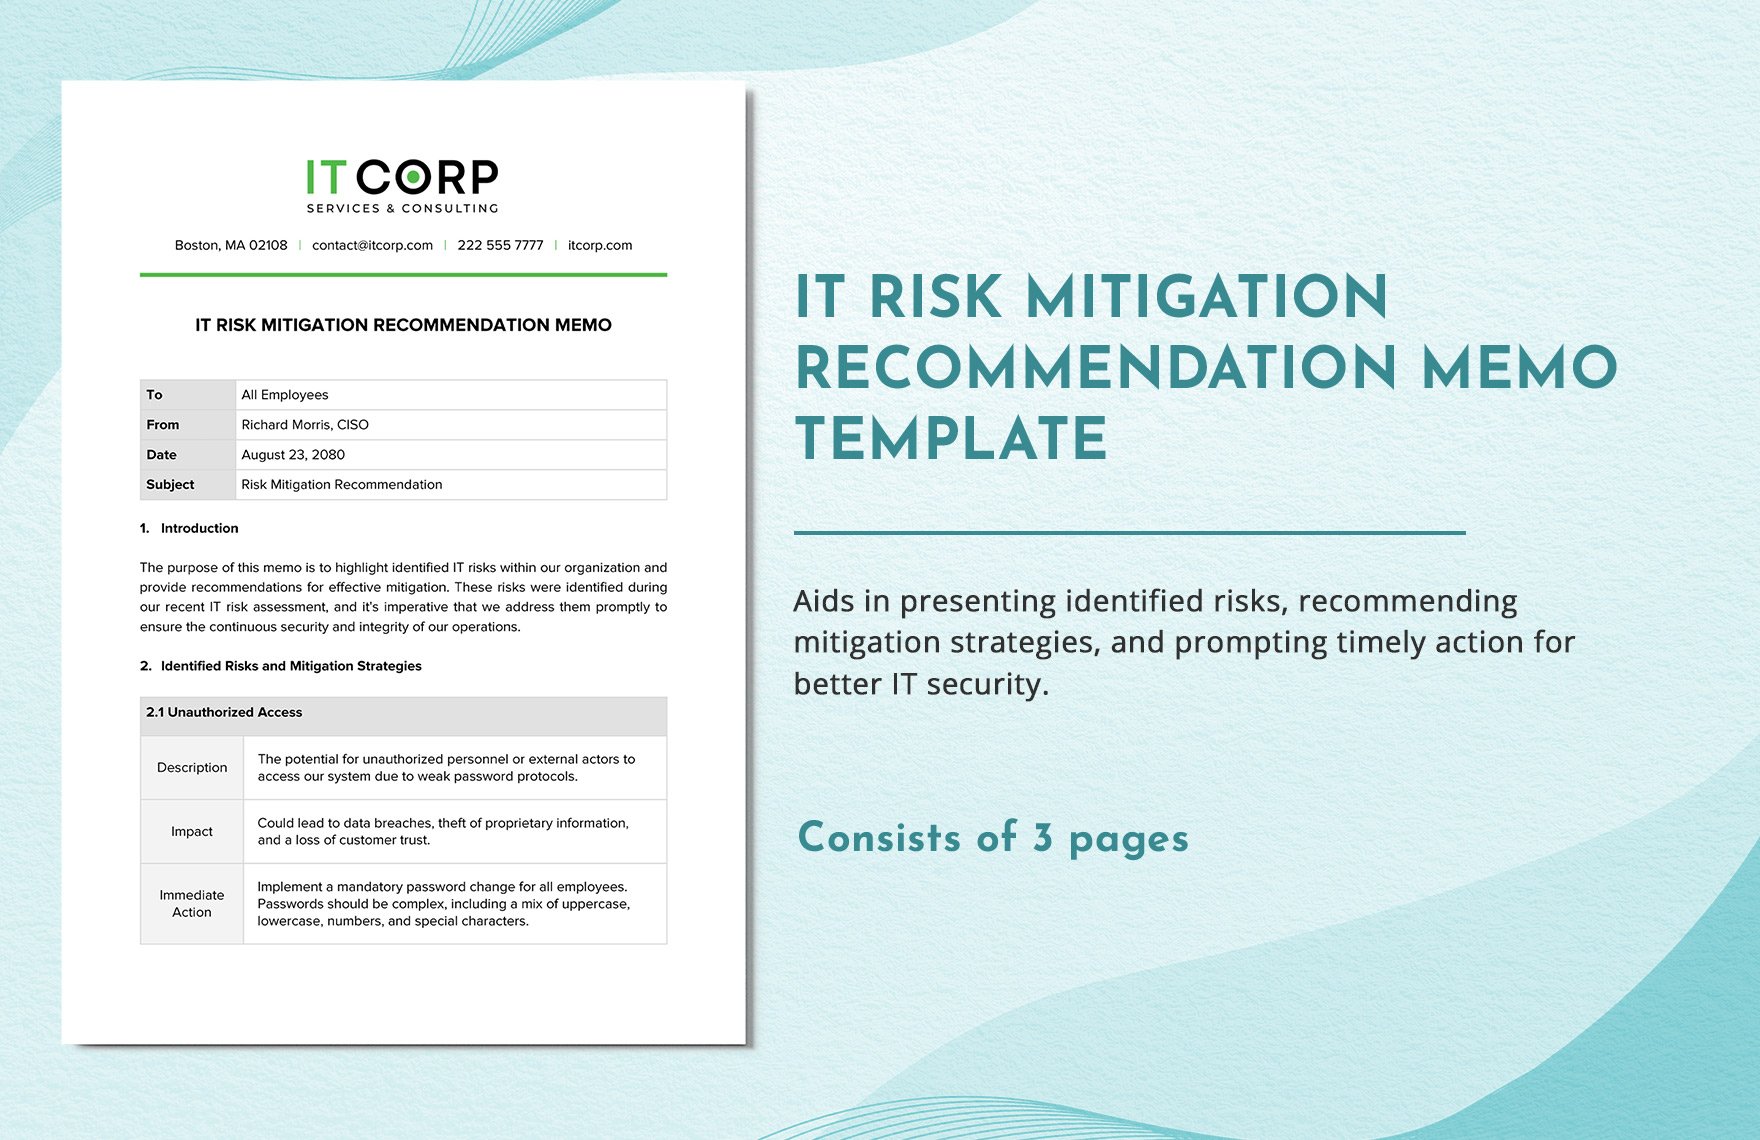 IT Risk Mitigation Recommendation Memo Template in Word, Google Docs, PDF